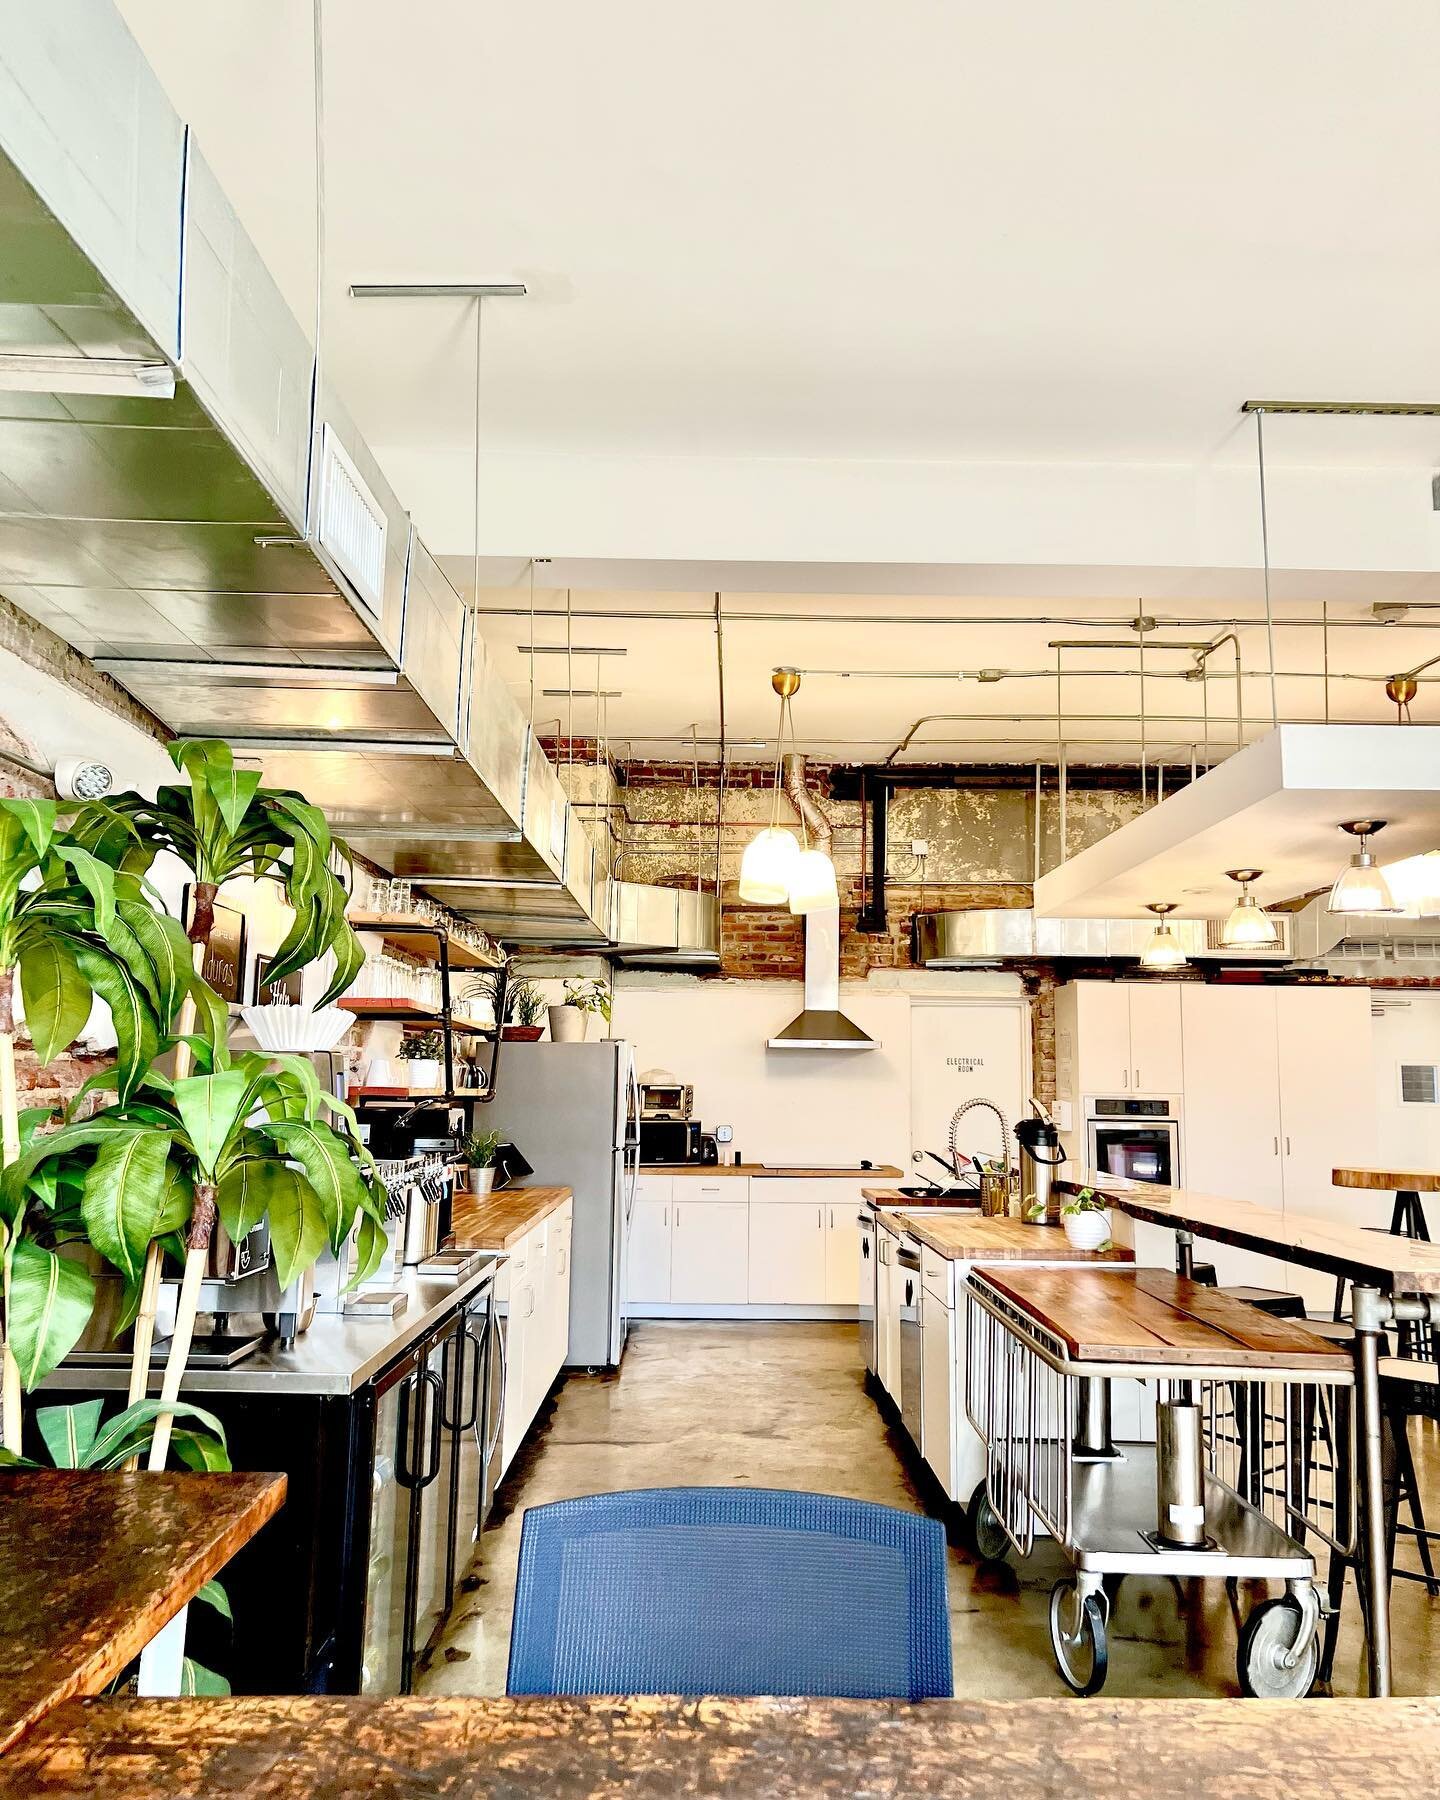 Coworking space: Workers and individuals of different companies come together and share an office space 

Some of the benefits of a coworking space include cost savings, convenience of equipment and utilities, and networking!

If you are interested i